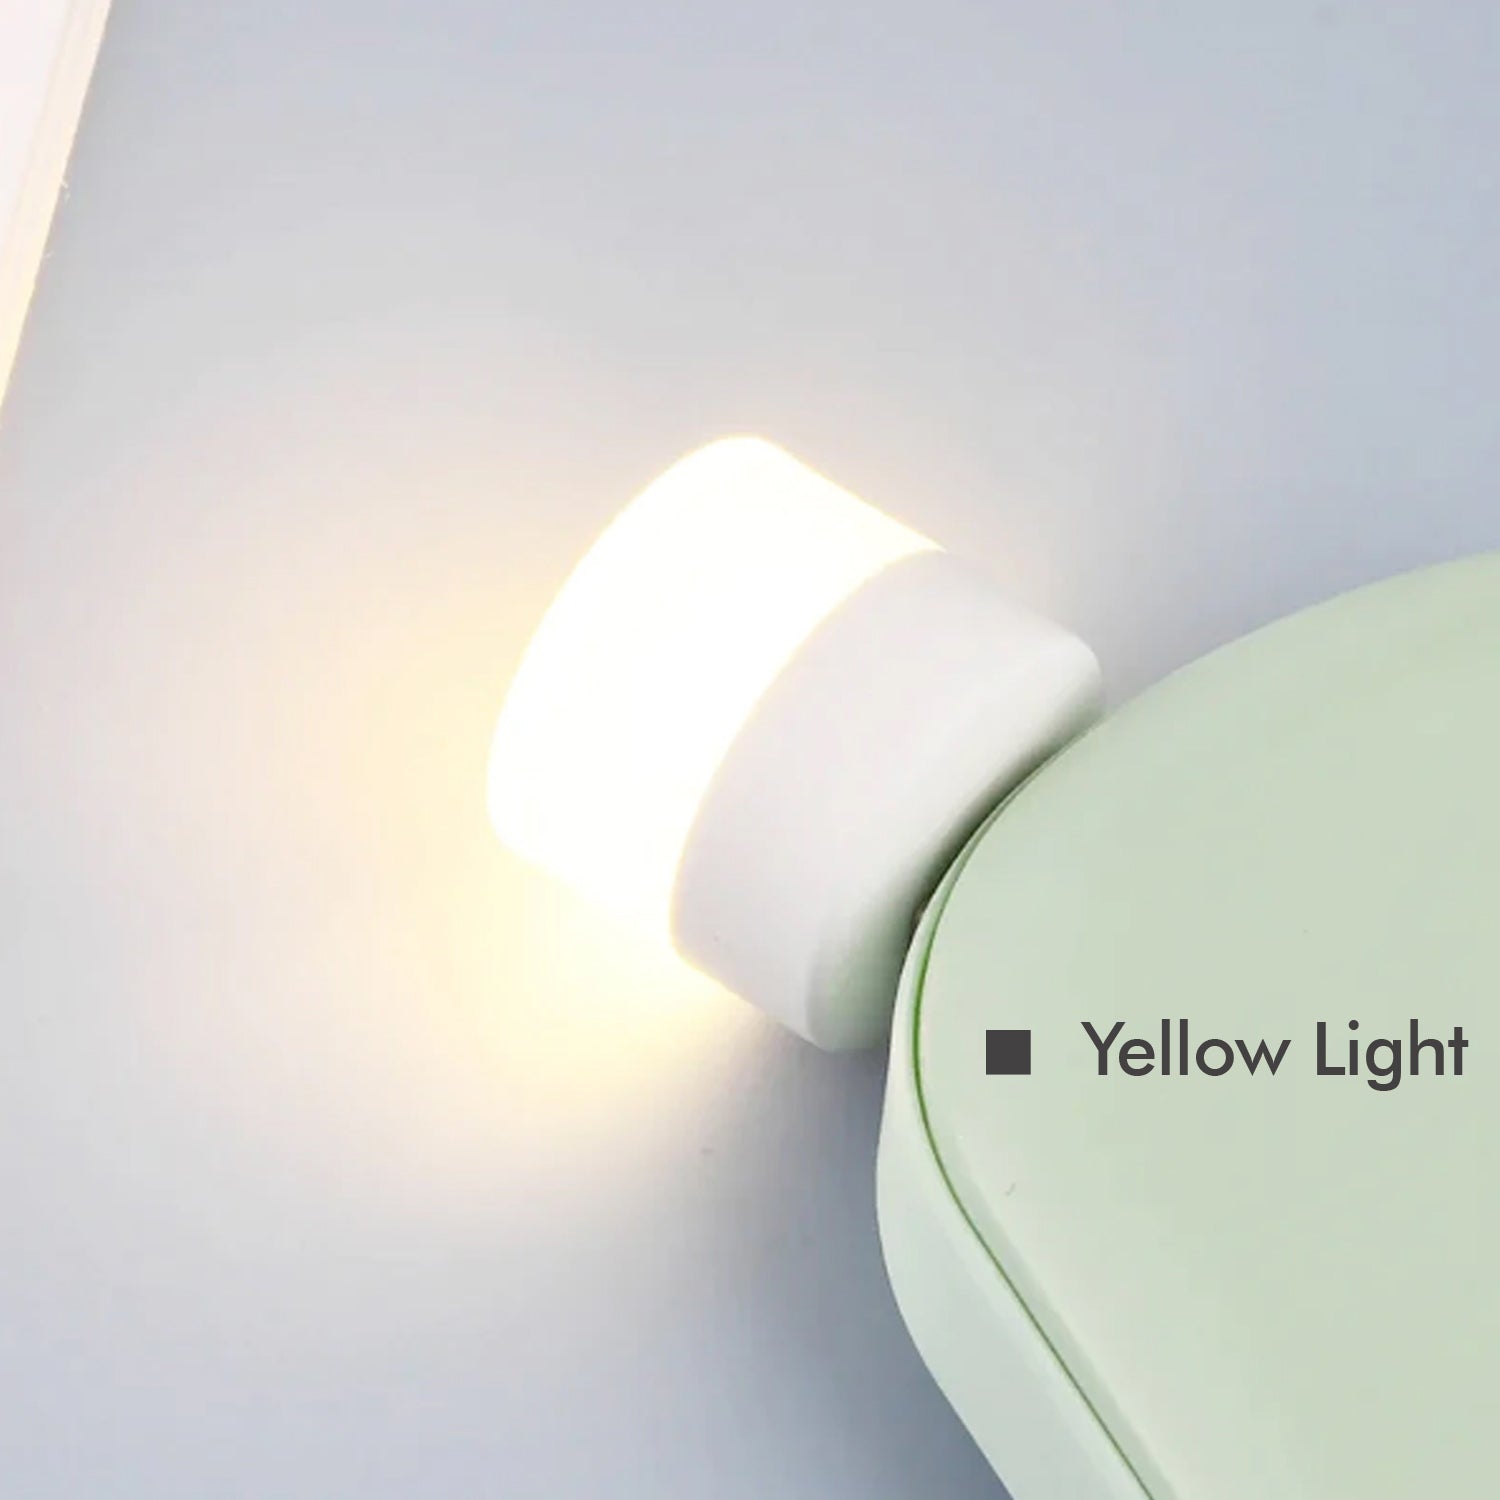 6096A Small USB Bulb used in official places for room lighting purposes. (Yellow Color)